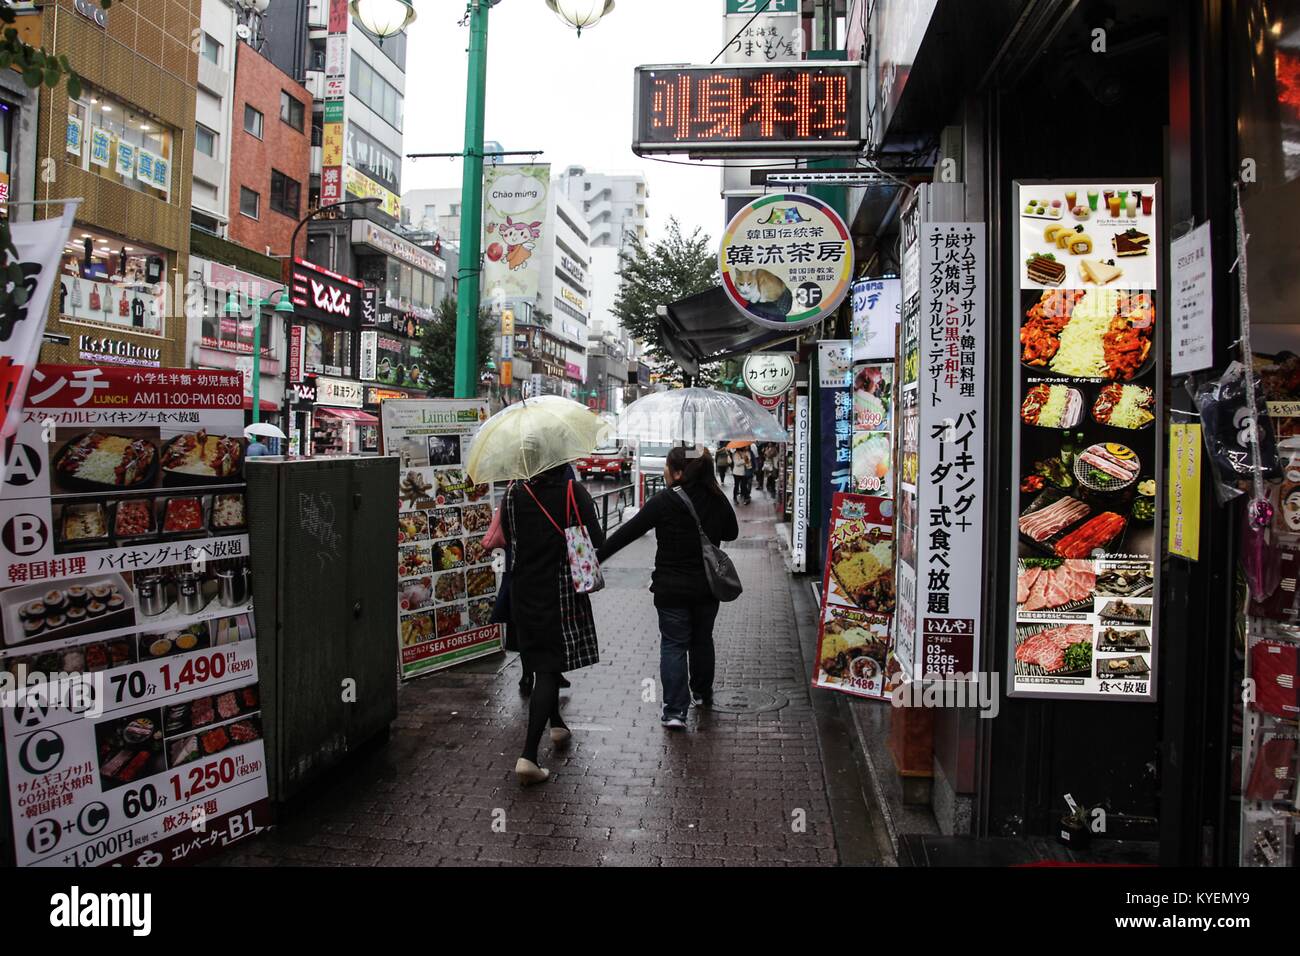 People carrying umbrellas walk past signs for street food in the Kabukicho Red Light District, Shinjuku, Tokyo, Japan on a rainy day, October 16, 2017. () Stock Photo